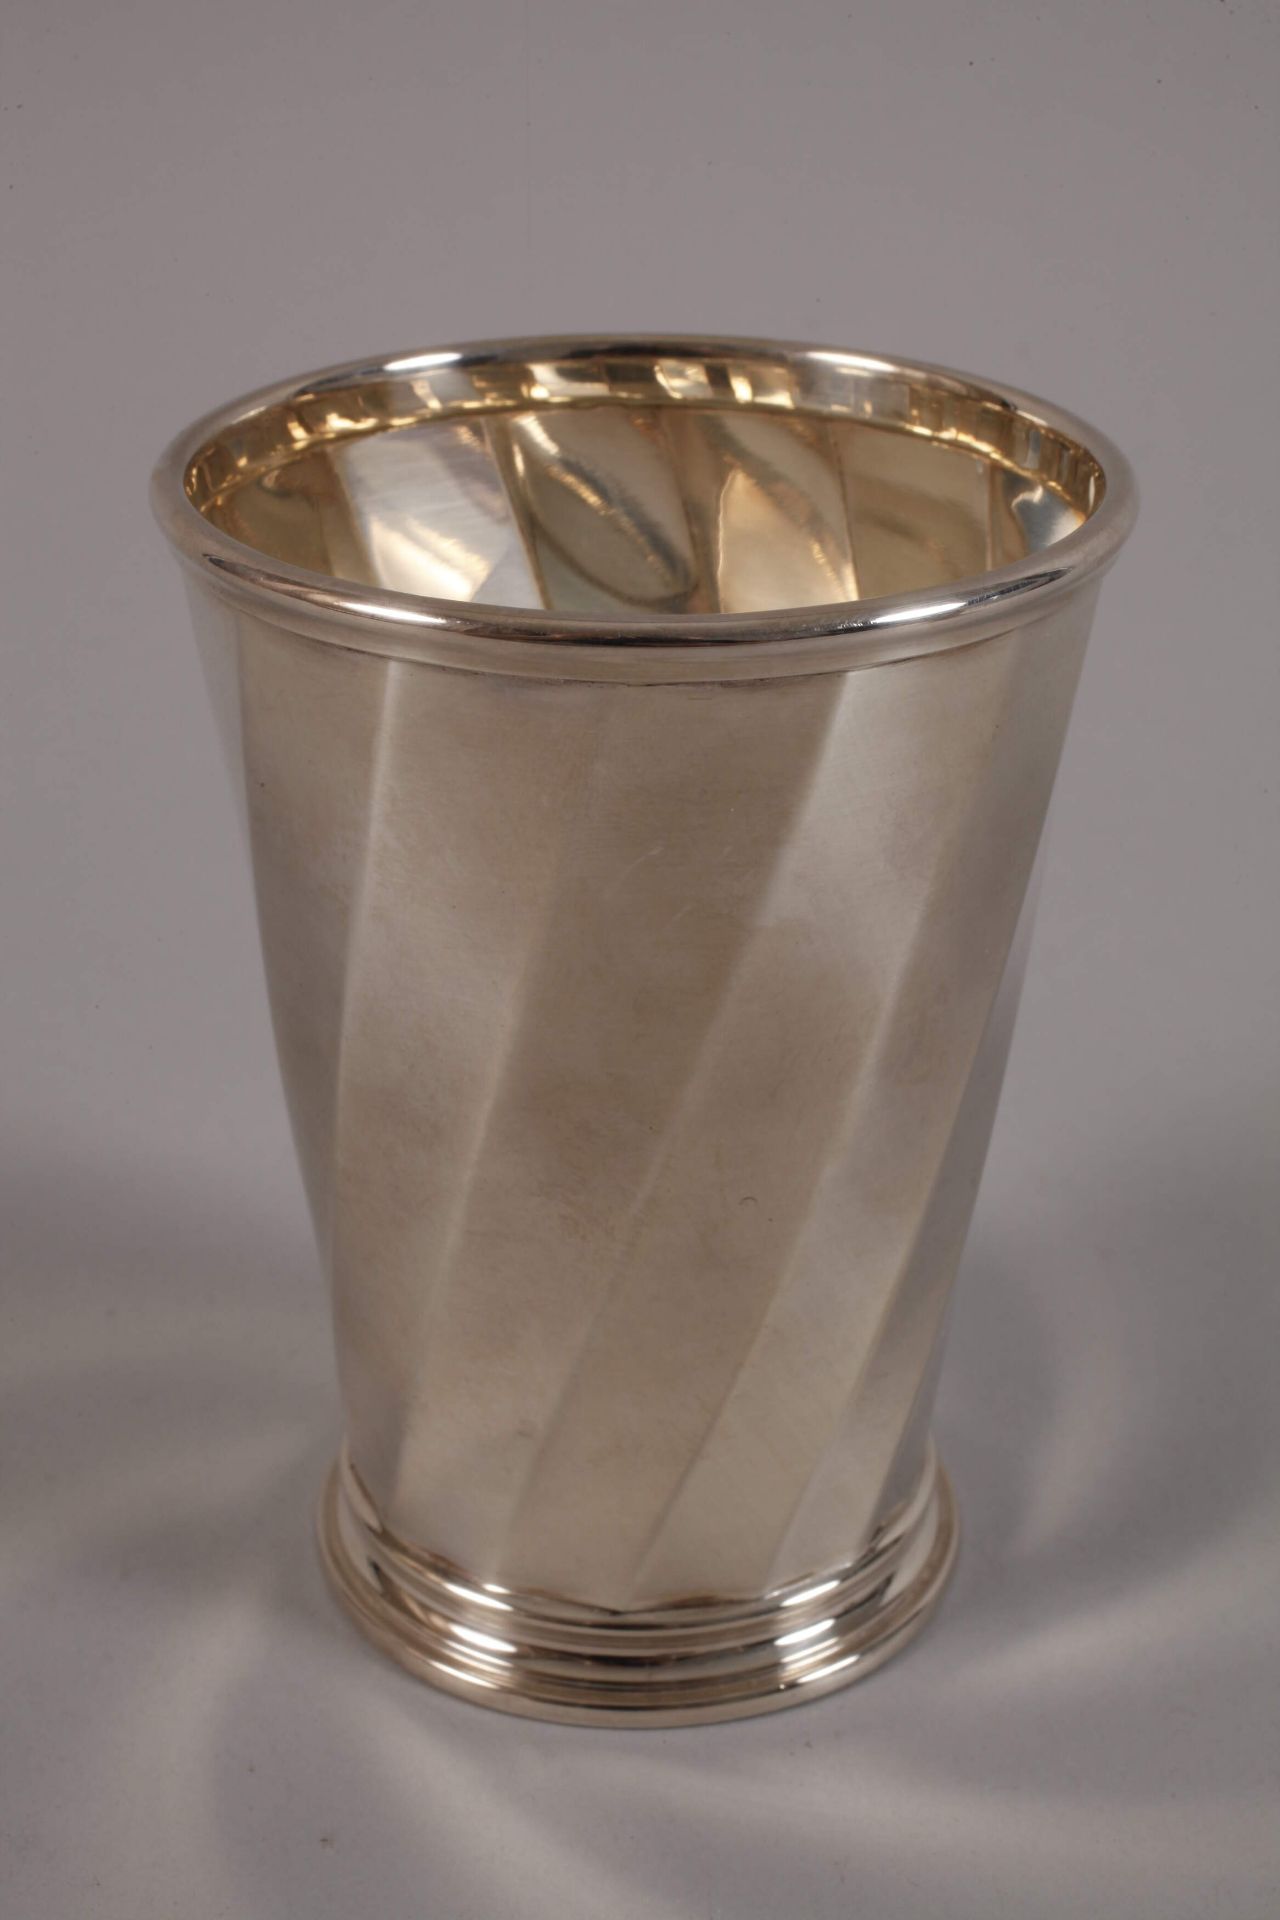 Silver tray with cups Italy - Image 4 of 5